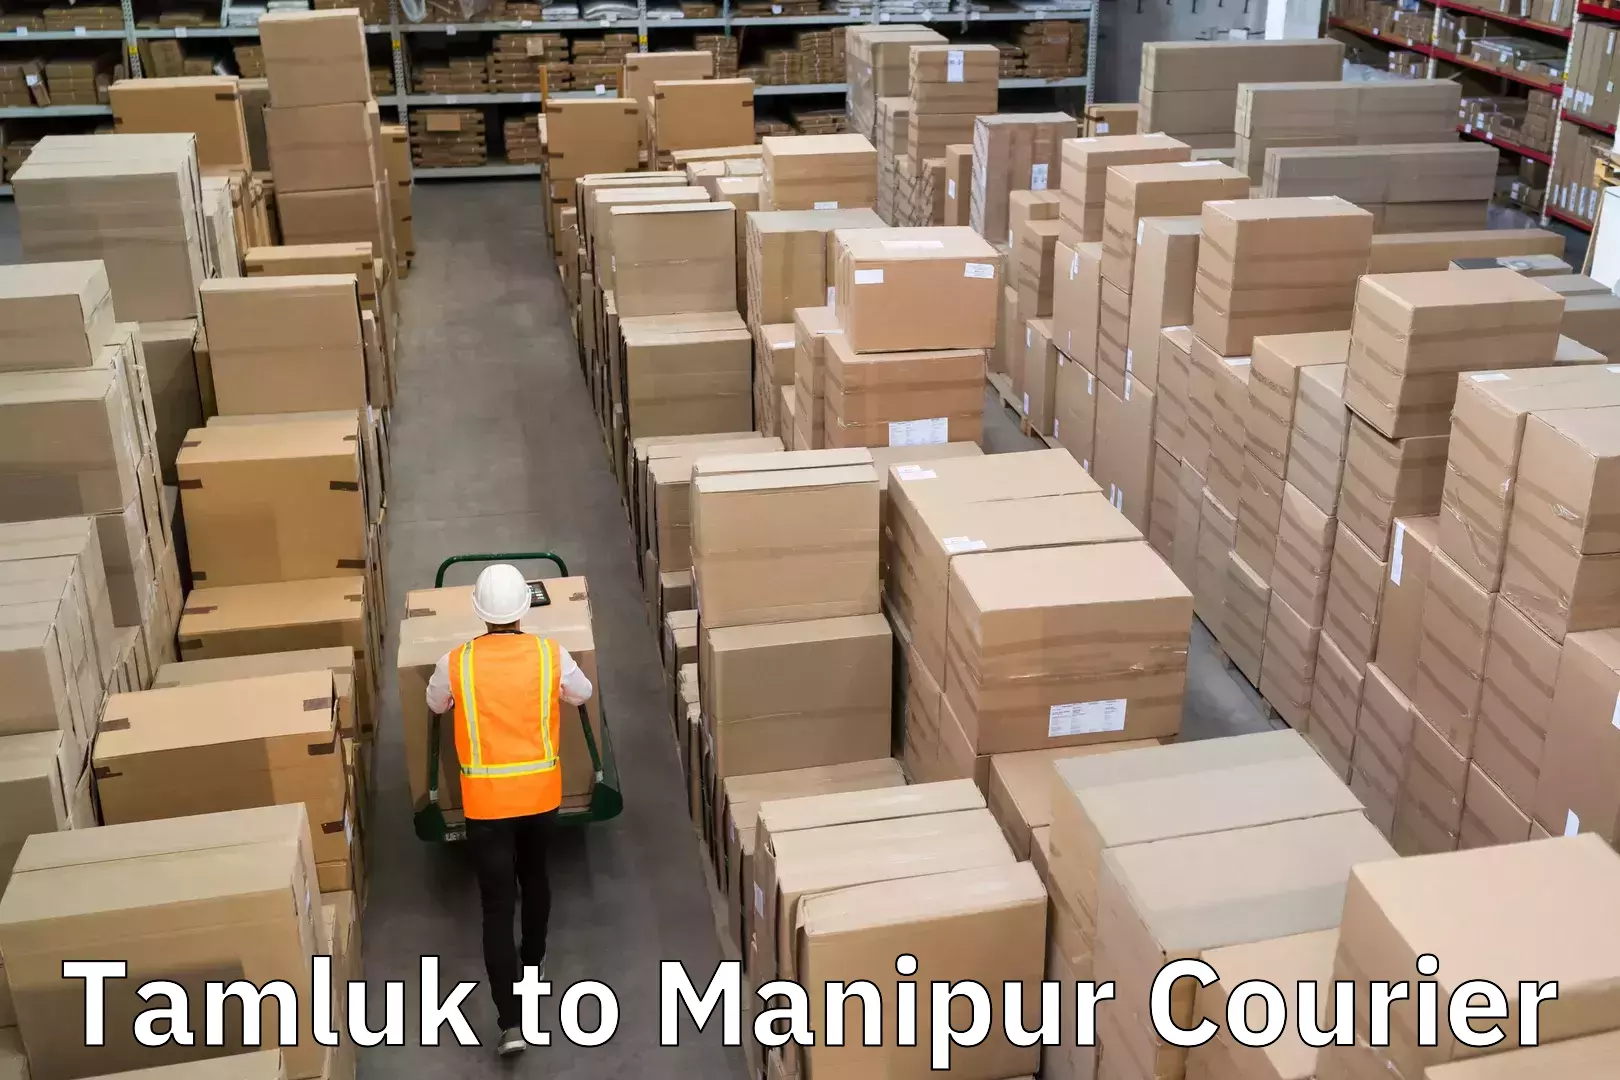 State-of-the-art courier technology Tamluk to Manipur